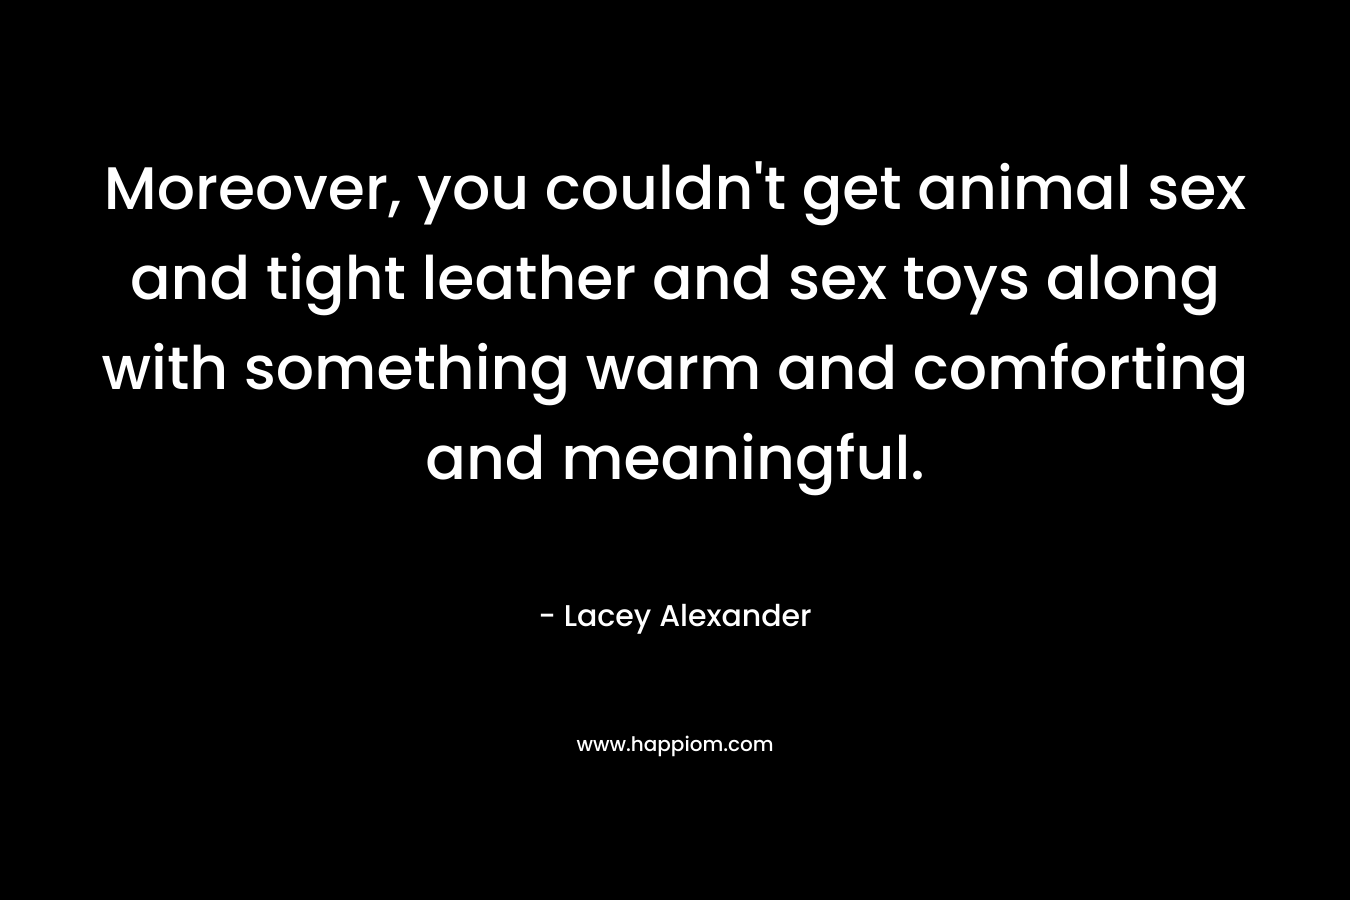 Moreover, you couldn’t get animal sex and tight leather and sex toys along with something warm and comforting and meaningful. – Lacey Alexander